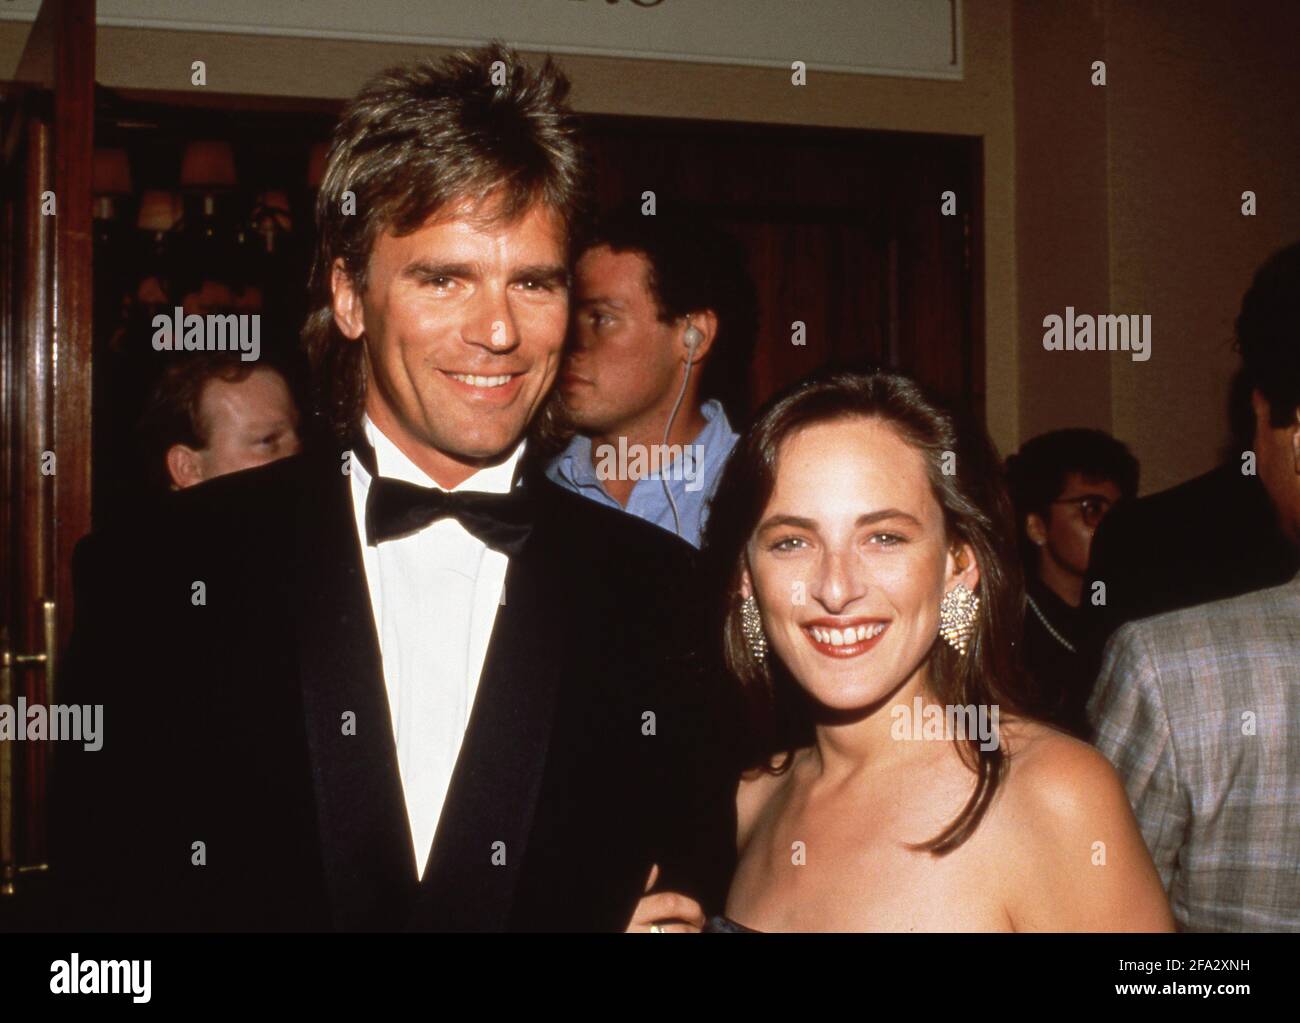 Marlee Matlin, Richard Dean Anderson at For Love Of Children AIDS Benefit Gala on July 8, 1988 at the Century Plaza Hotel in Century City, California Credit: Ralph Dominguez/MediaPunch Stock Photo